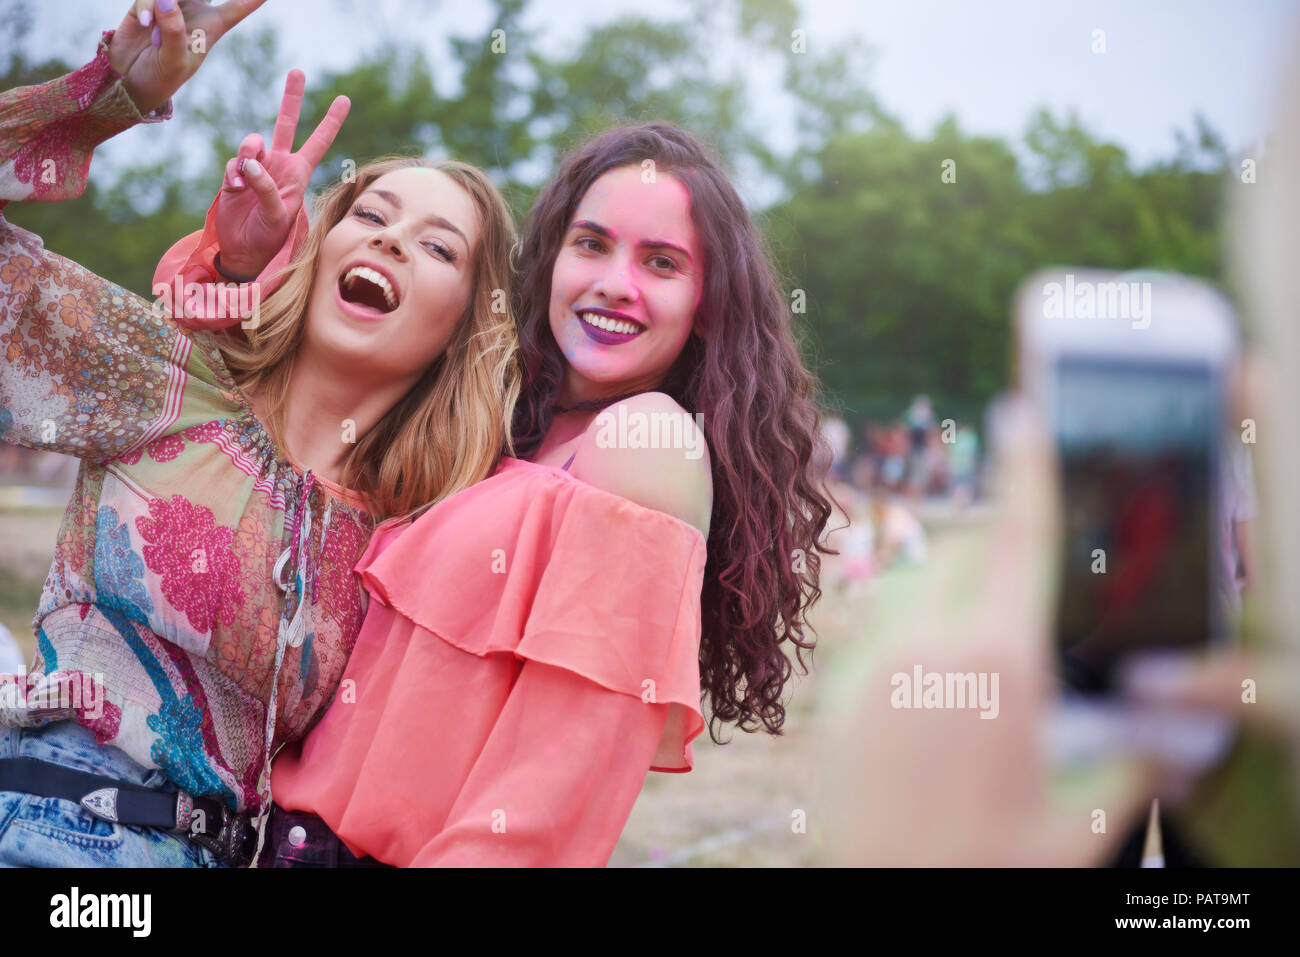 Portrait of happy women at the music festival, photographing Stock Photo